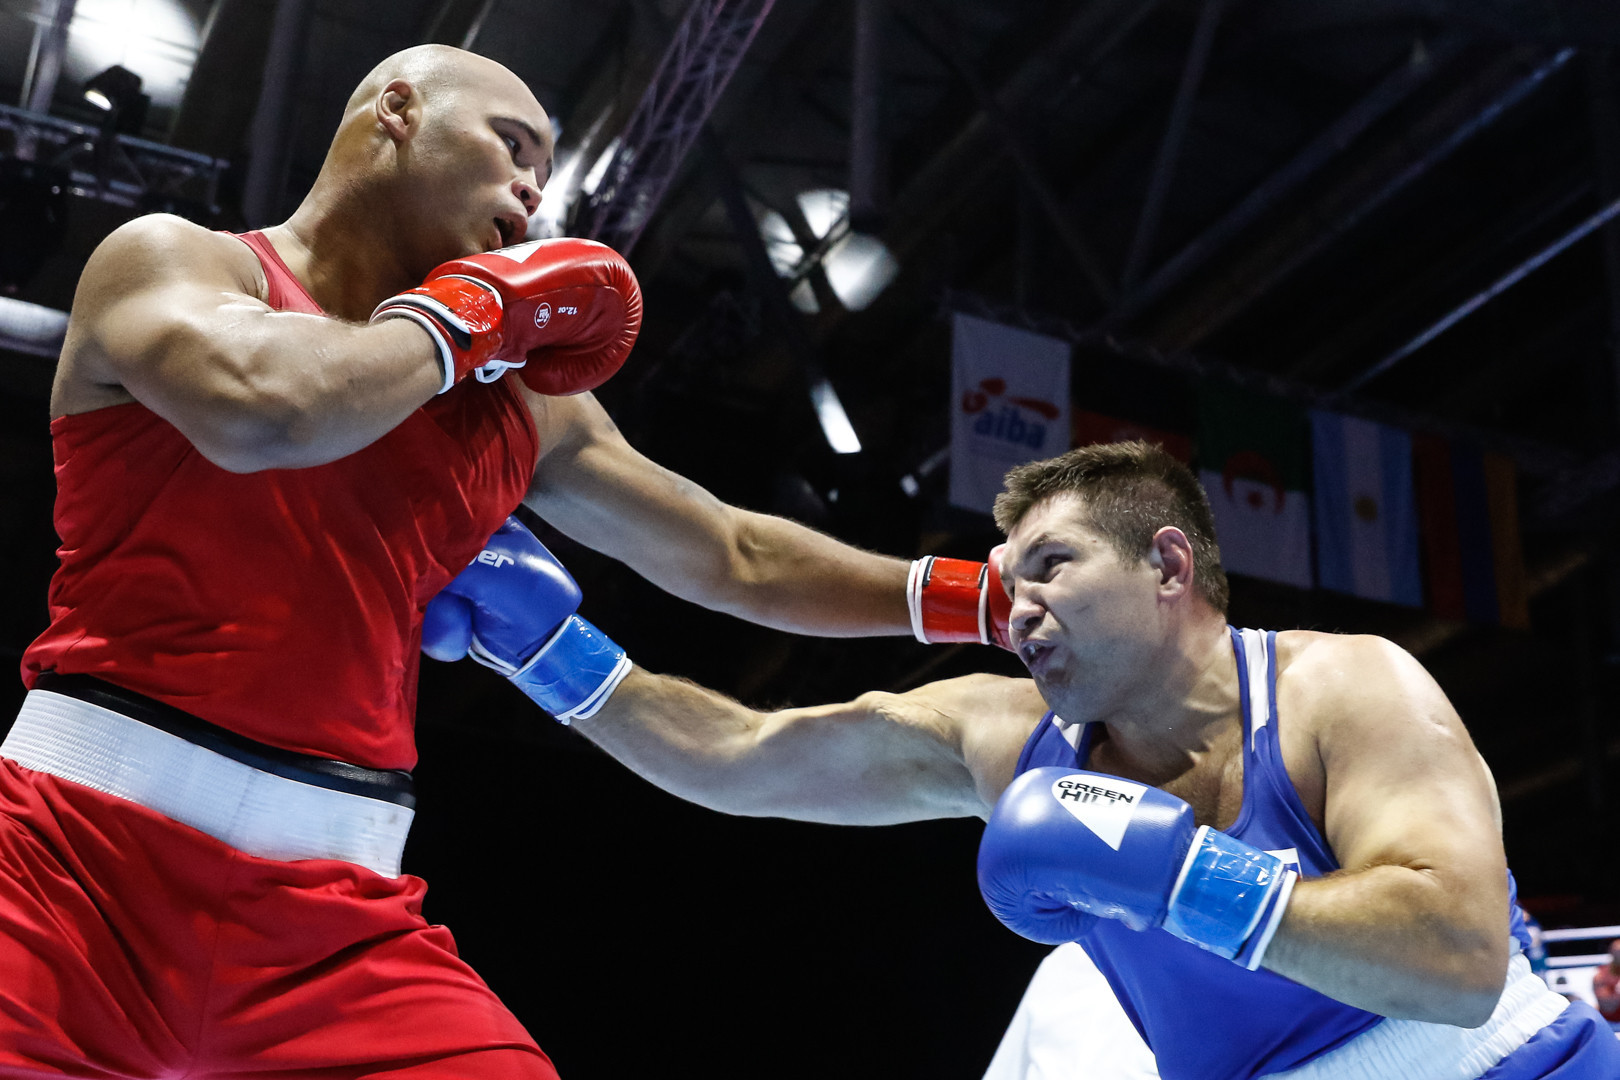 The AIBA technical delegate confirmed that the result had been overturned after it was deemed that Babanin was "more competitive" than Clarke in the the third round of the bout ©Yekaterinburg 2019